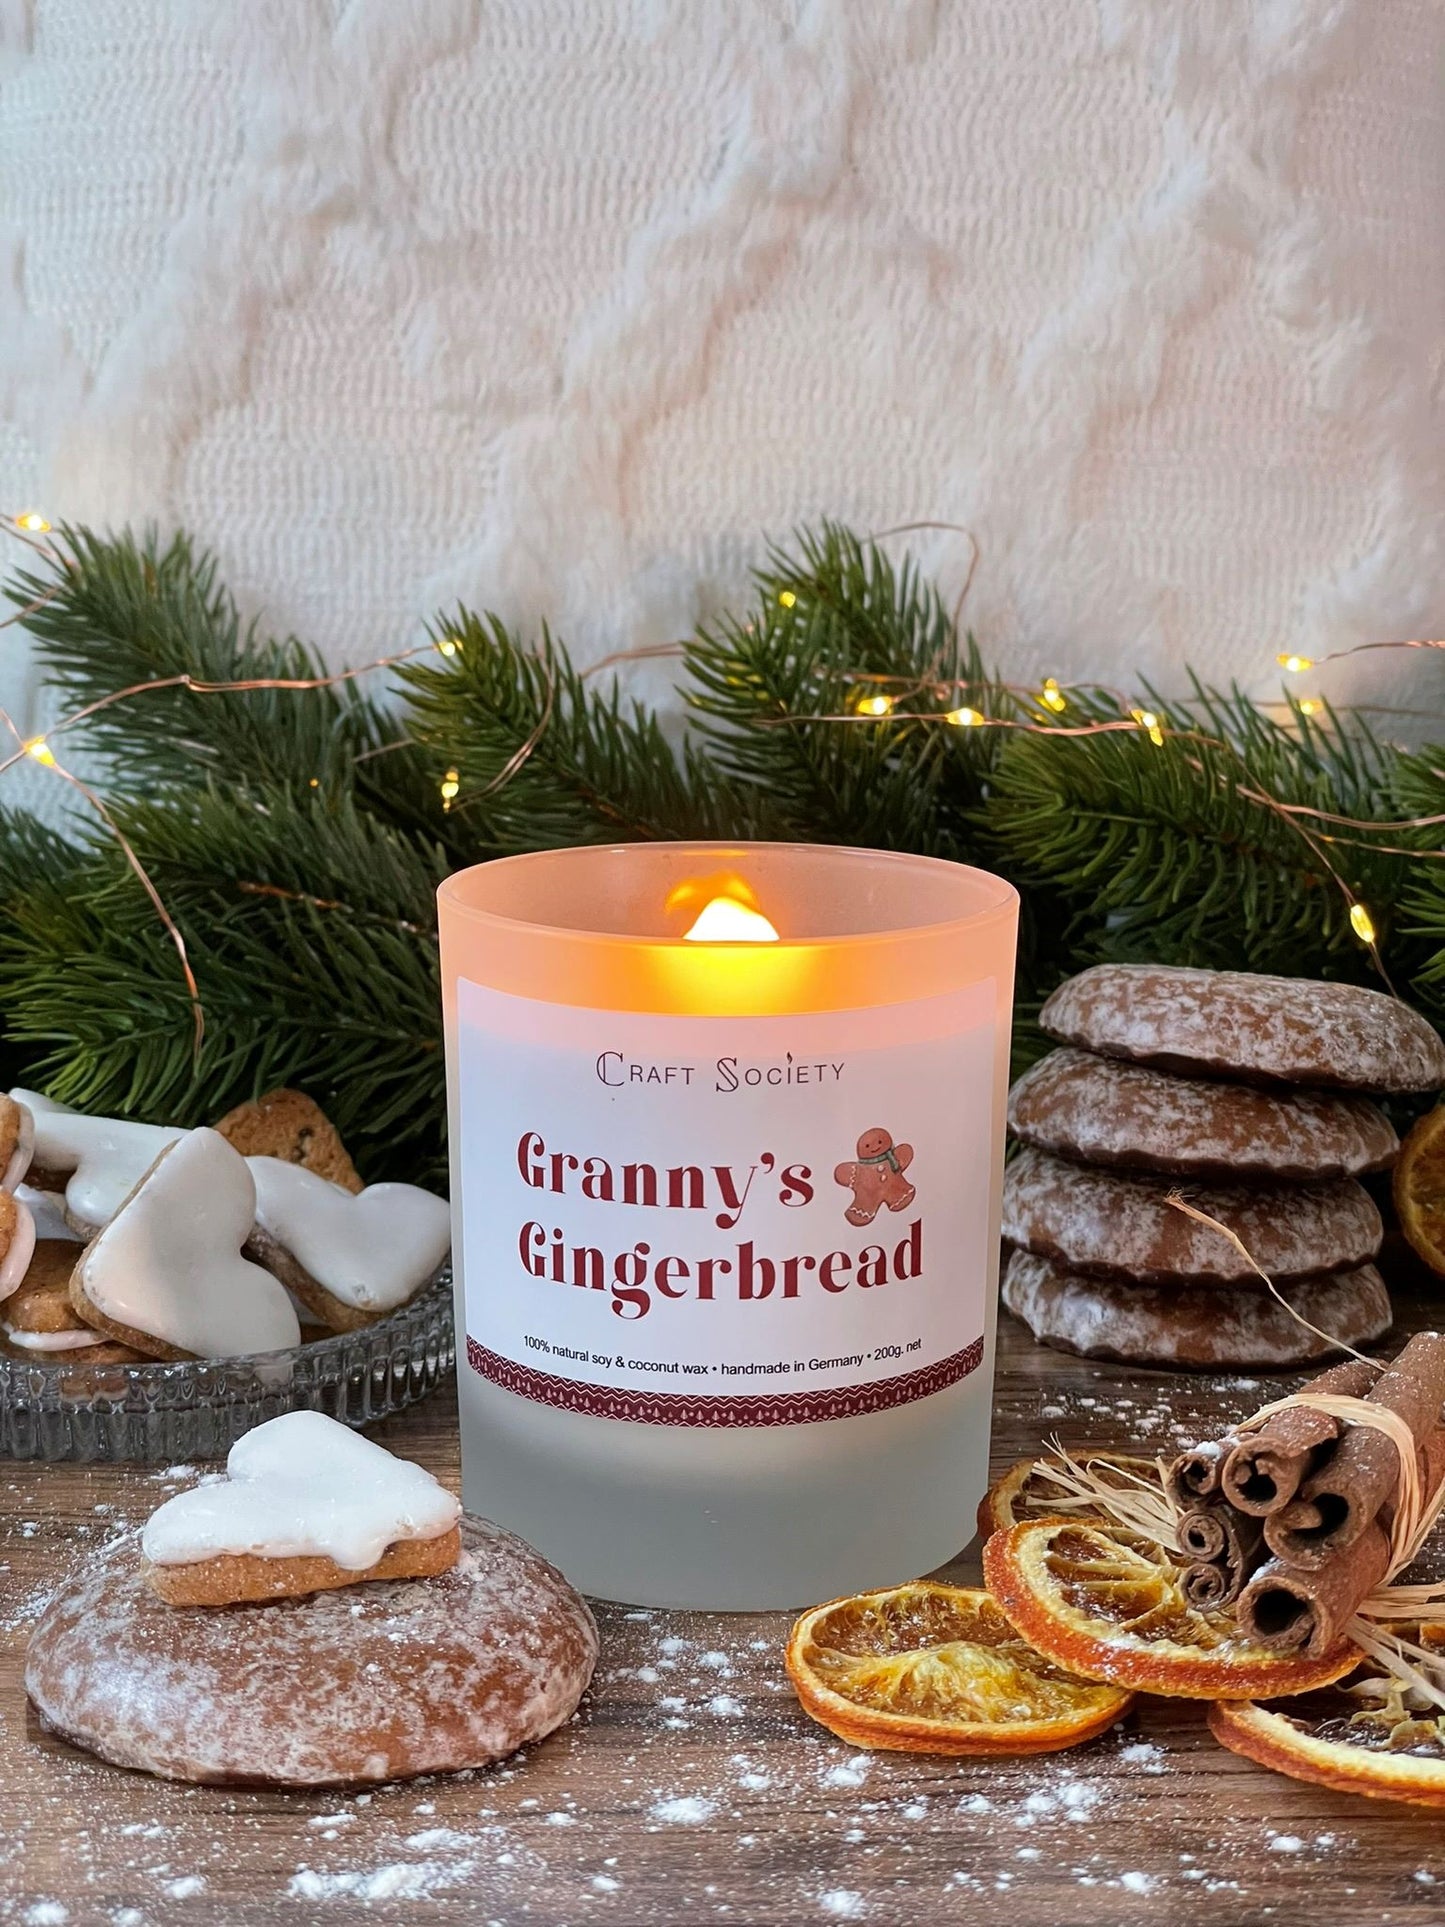 A burning deluxe scented candle made from vegetable wax on a decorated background